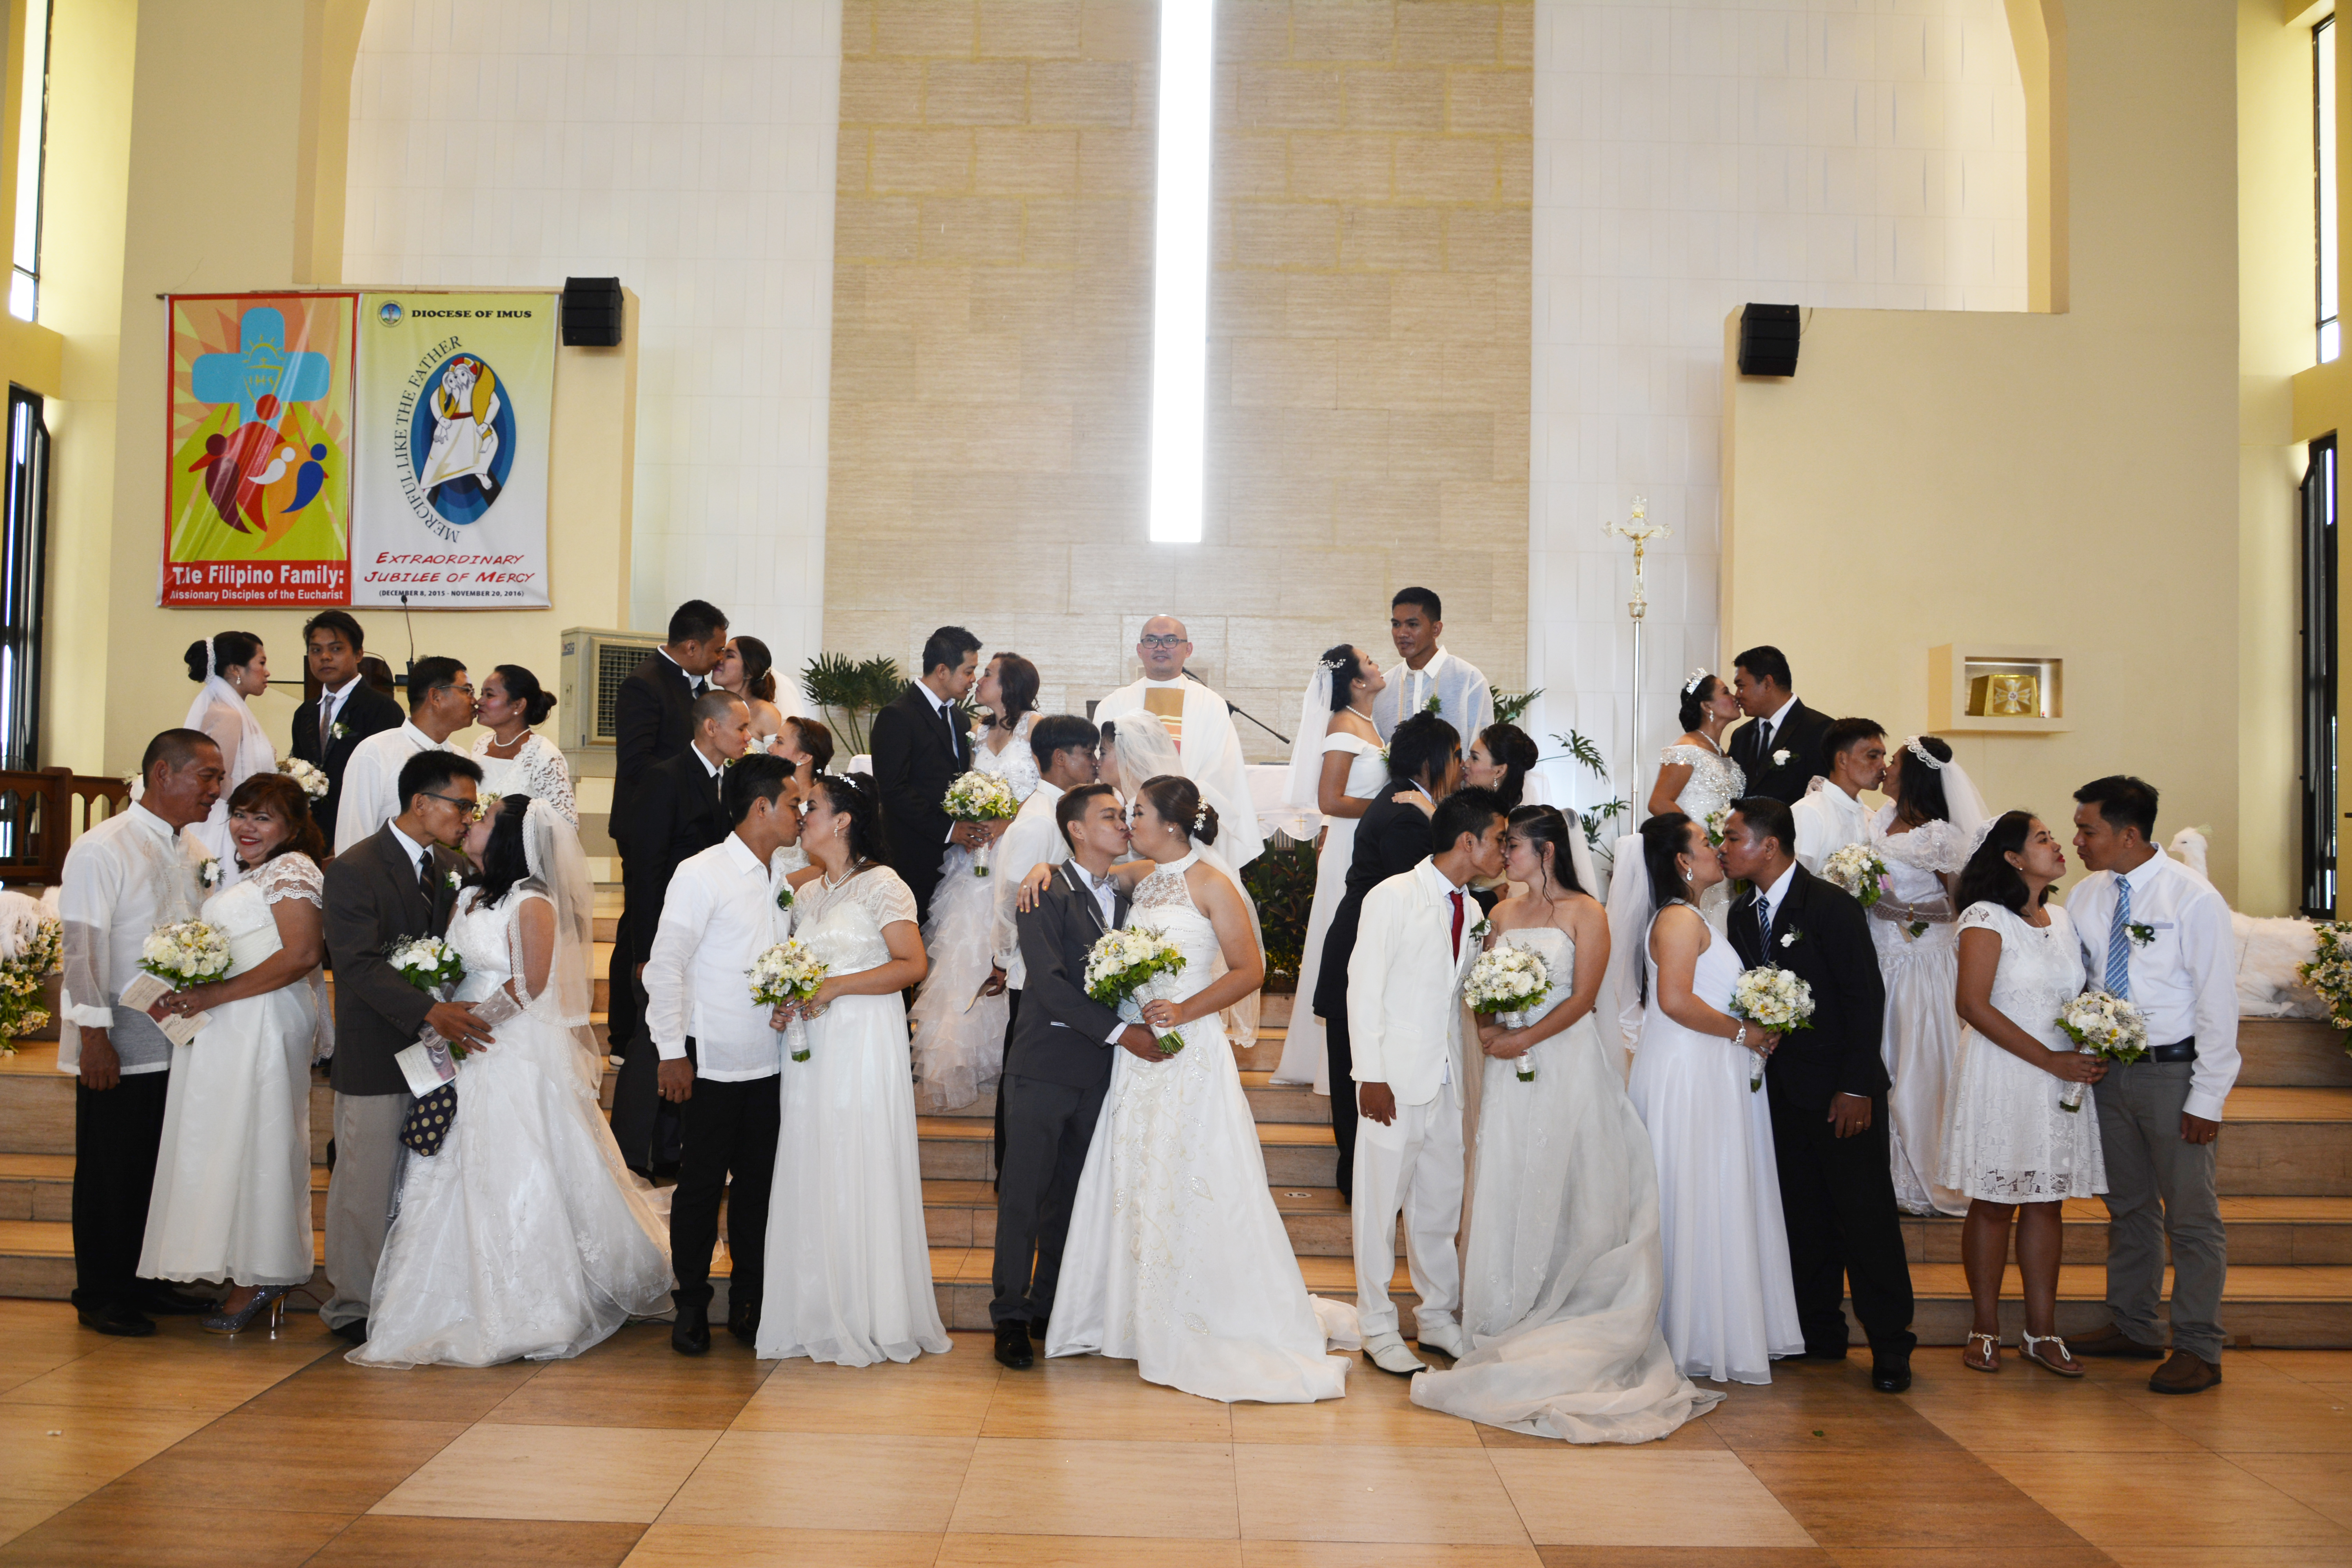 A group shot of the seventeen May Forever: Kasalan sa Lancaster New City couples celebrating a successful wedding at the Church of the Holy Family